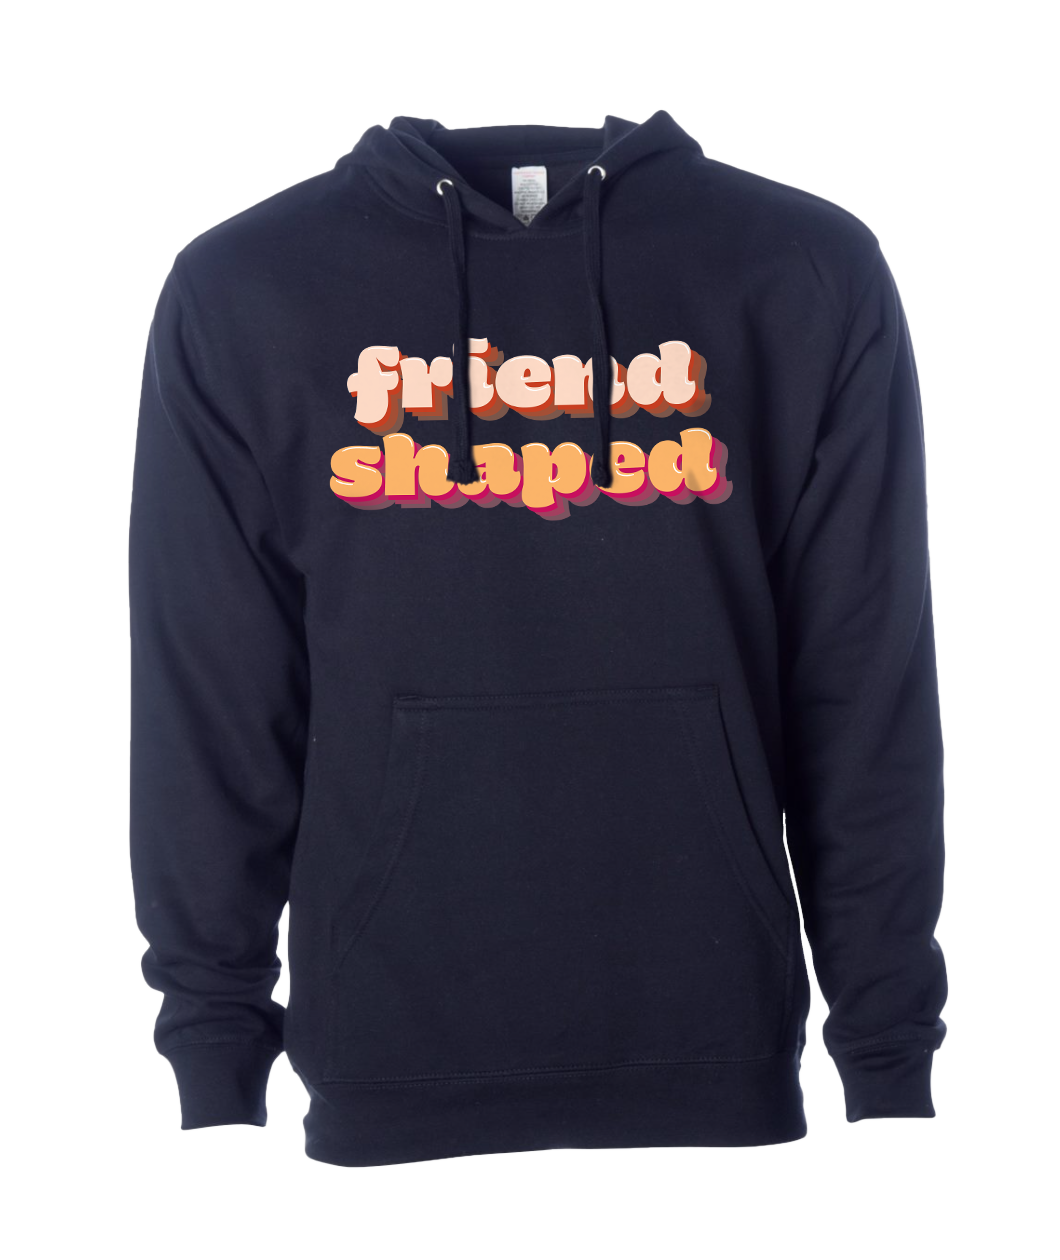 A navy hoodie with the word "Friend" above the word "Shaped" written across the front in colorful, shadowed font. From Drawfee. 